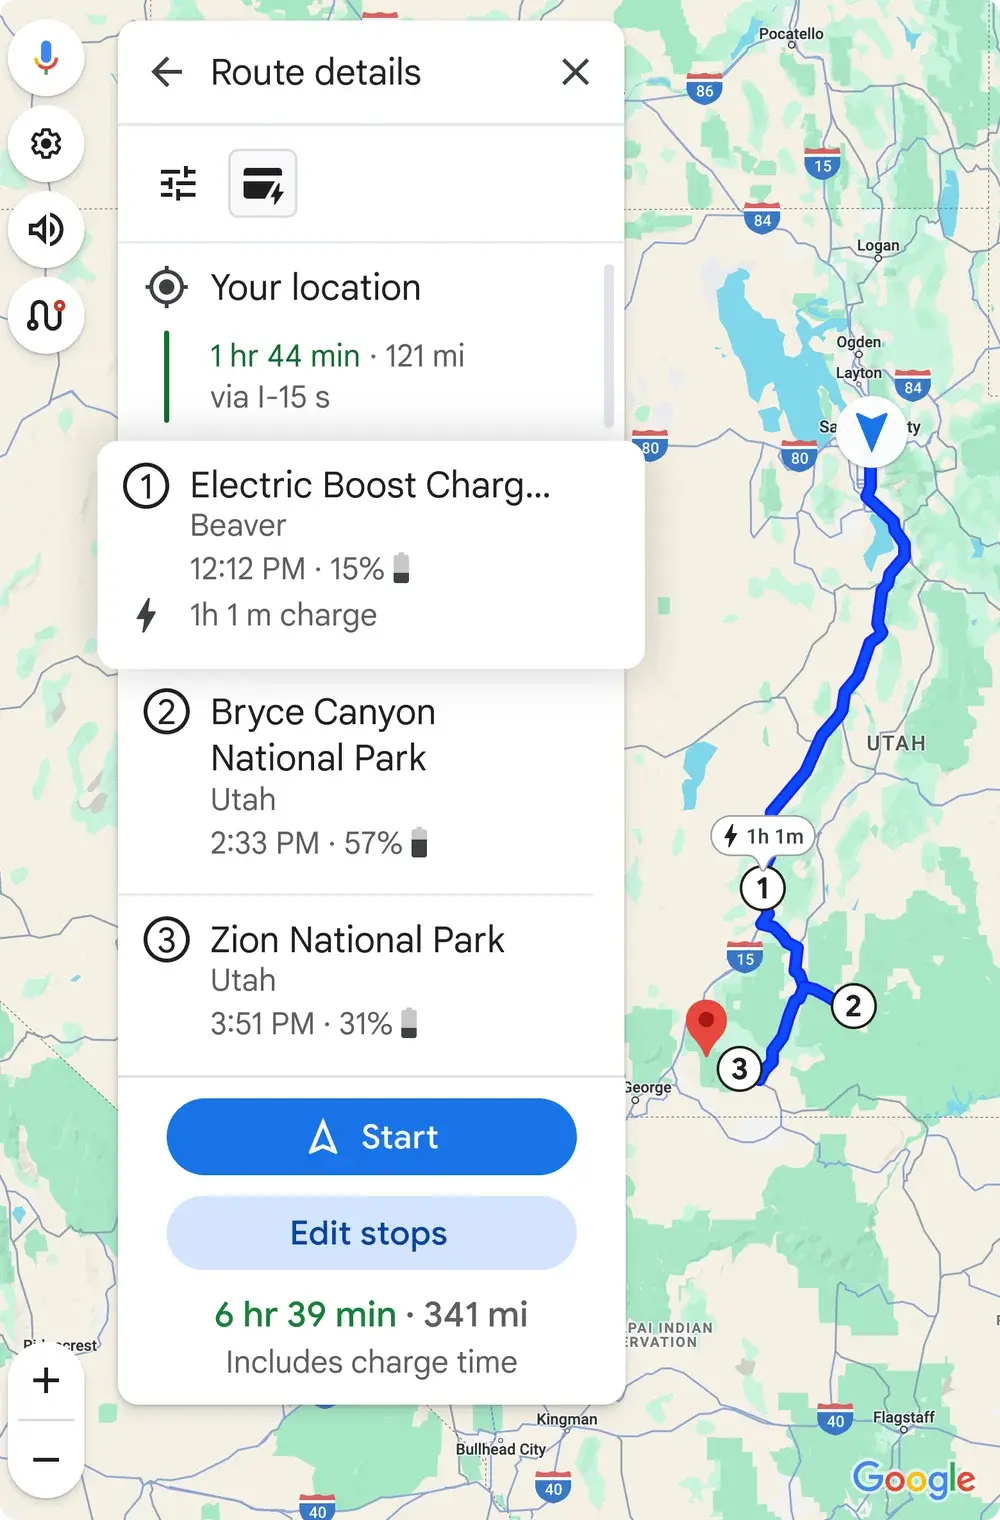 (Image Source - Google) Multi-stop trips - Google Maps will provide detailed directions to EV charging stations and more info for drivers